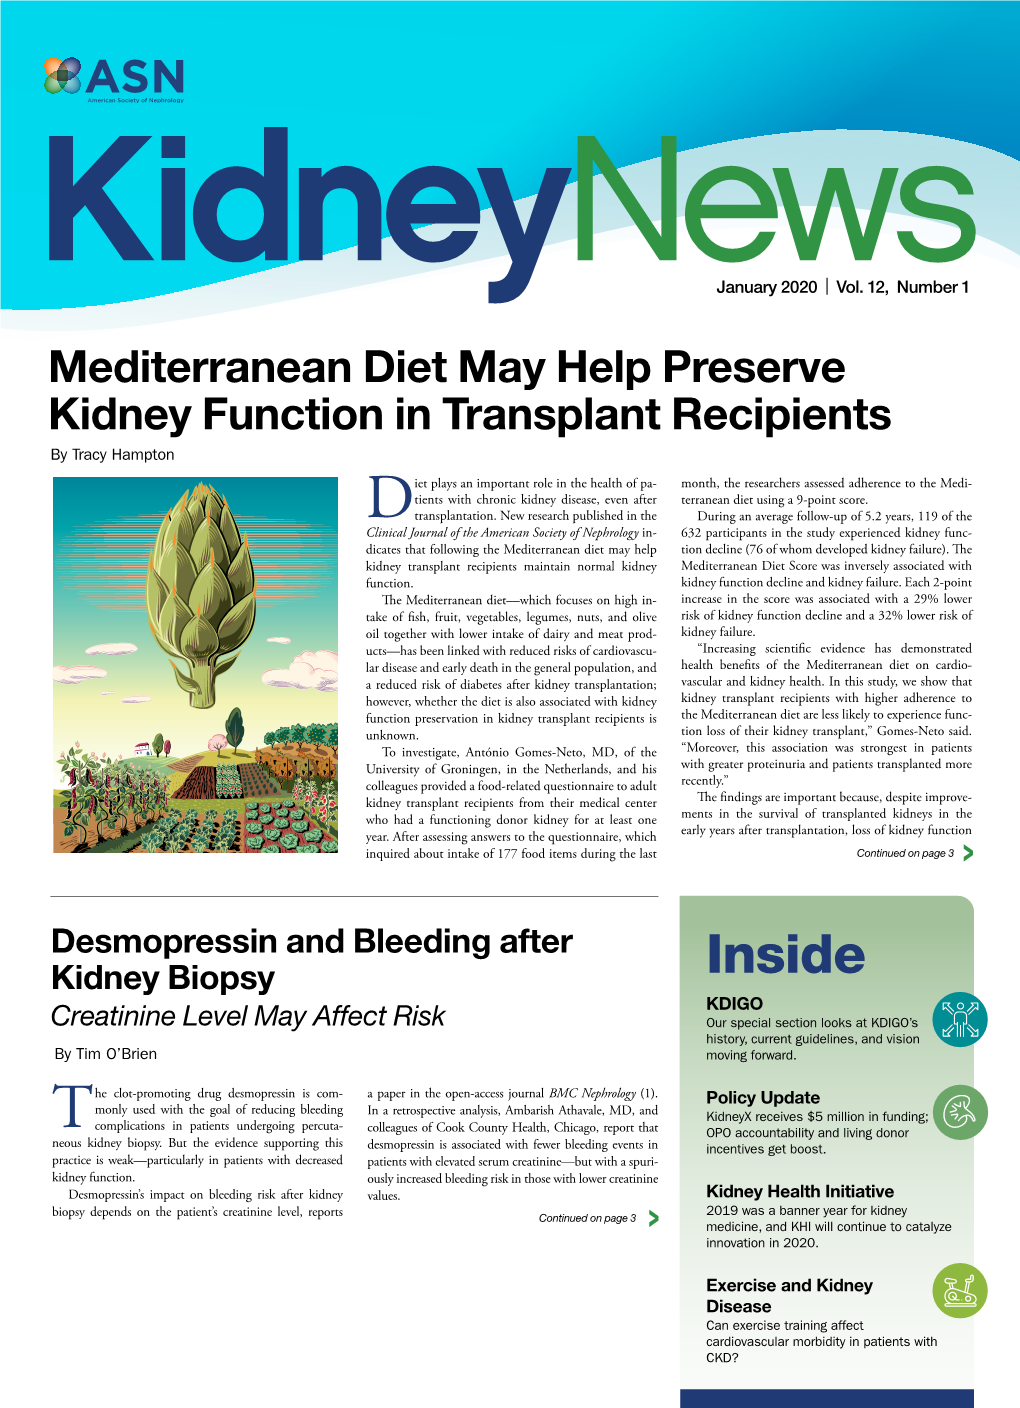 Kidney News Is Published by the American Society of Nephrology 1401 H Street, NW, Suite 900, Washington, DC 20005